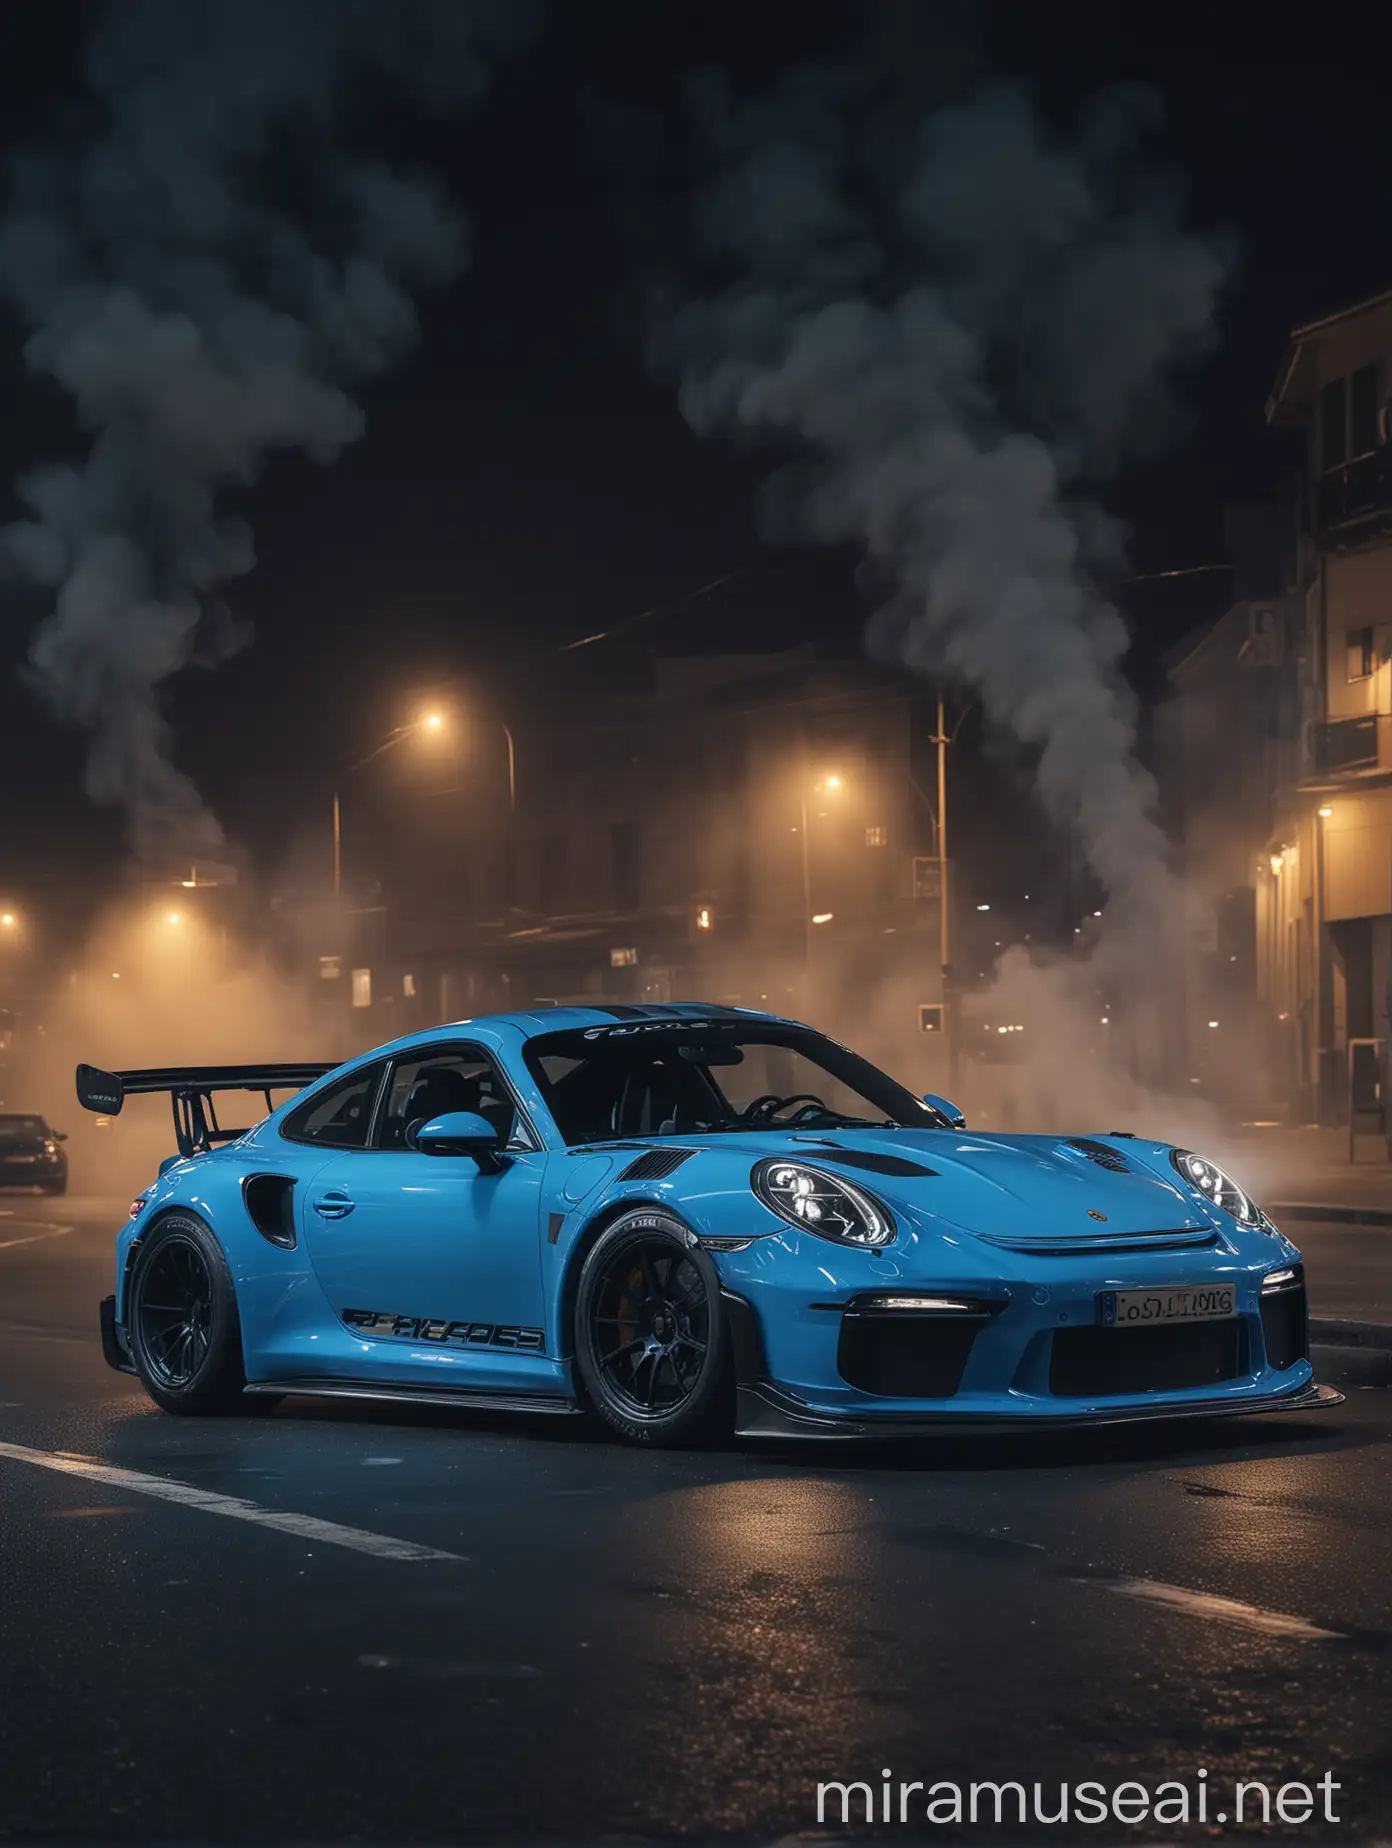 Realistic Blue Porsche GT3 RS with Xenon Lights at Night